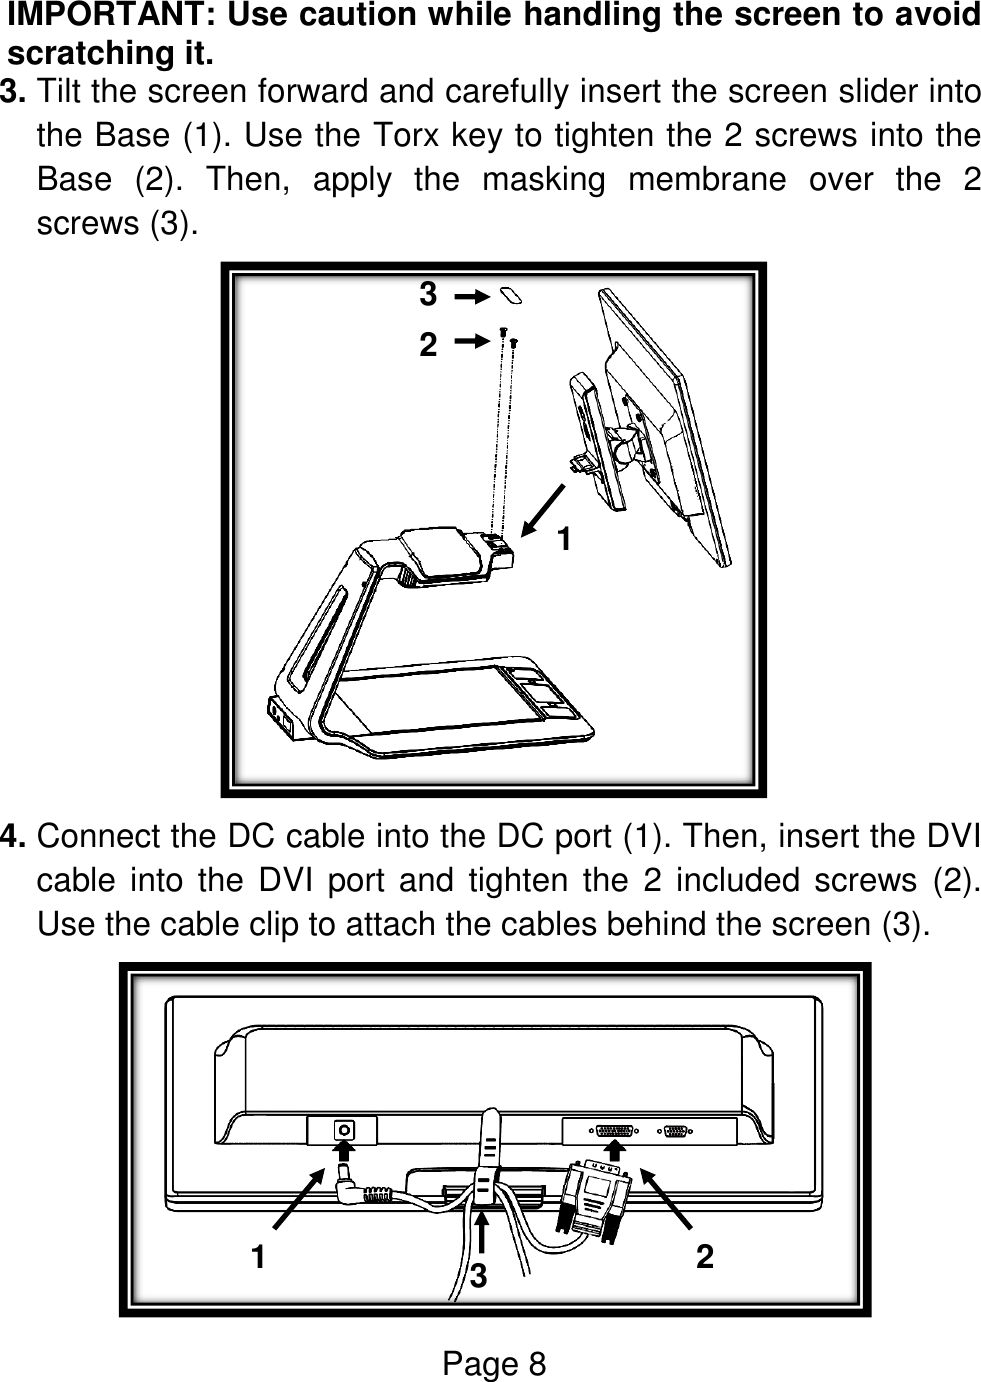 Page 8  IMPORTANT: Use caution while handling the screen to avoid scratching it. 3. Tilt the screen forward and carefully insert the screen slider into the Base (1). Use the Torx key to tighten the 2 screws into the Base  (2).  Then,  apply  the  masking  membrane  over  the  2 screws (3).  4. Connect the DC cable into the DC port (1). Then, insert the DVI cable into the DVI port and tighten the  2  included screws  (2). Use the cable clip to attach the cables behind the screen (3).  1  2  3  1  2  3  